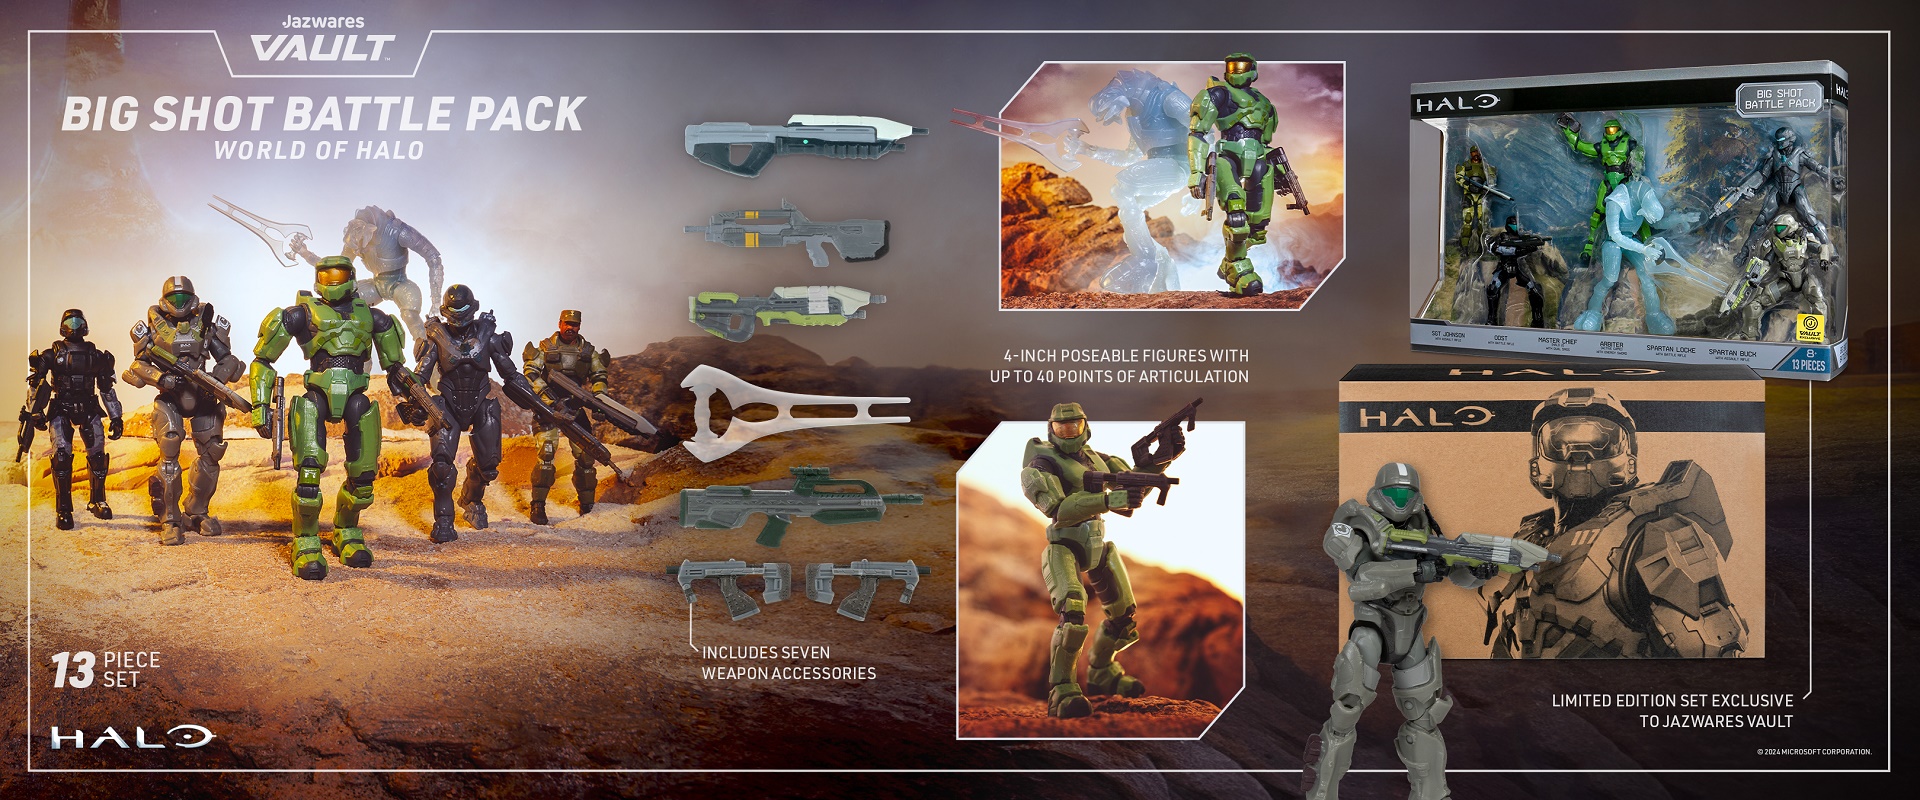 Halo Gear image of the Big Shot battle Pack